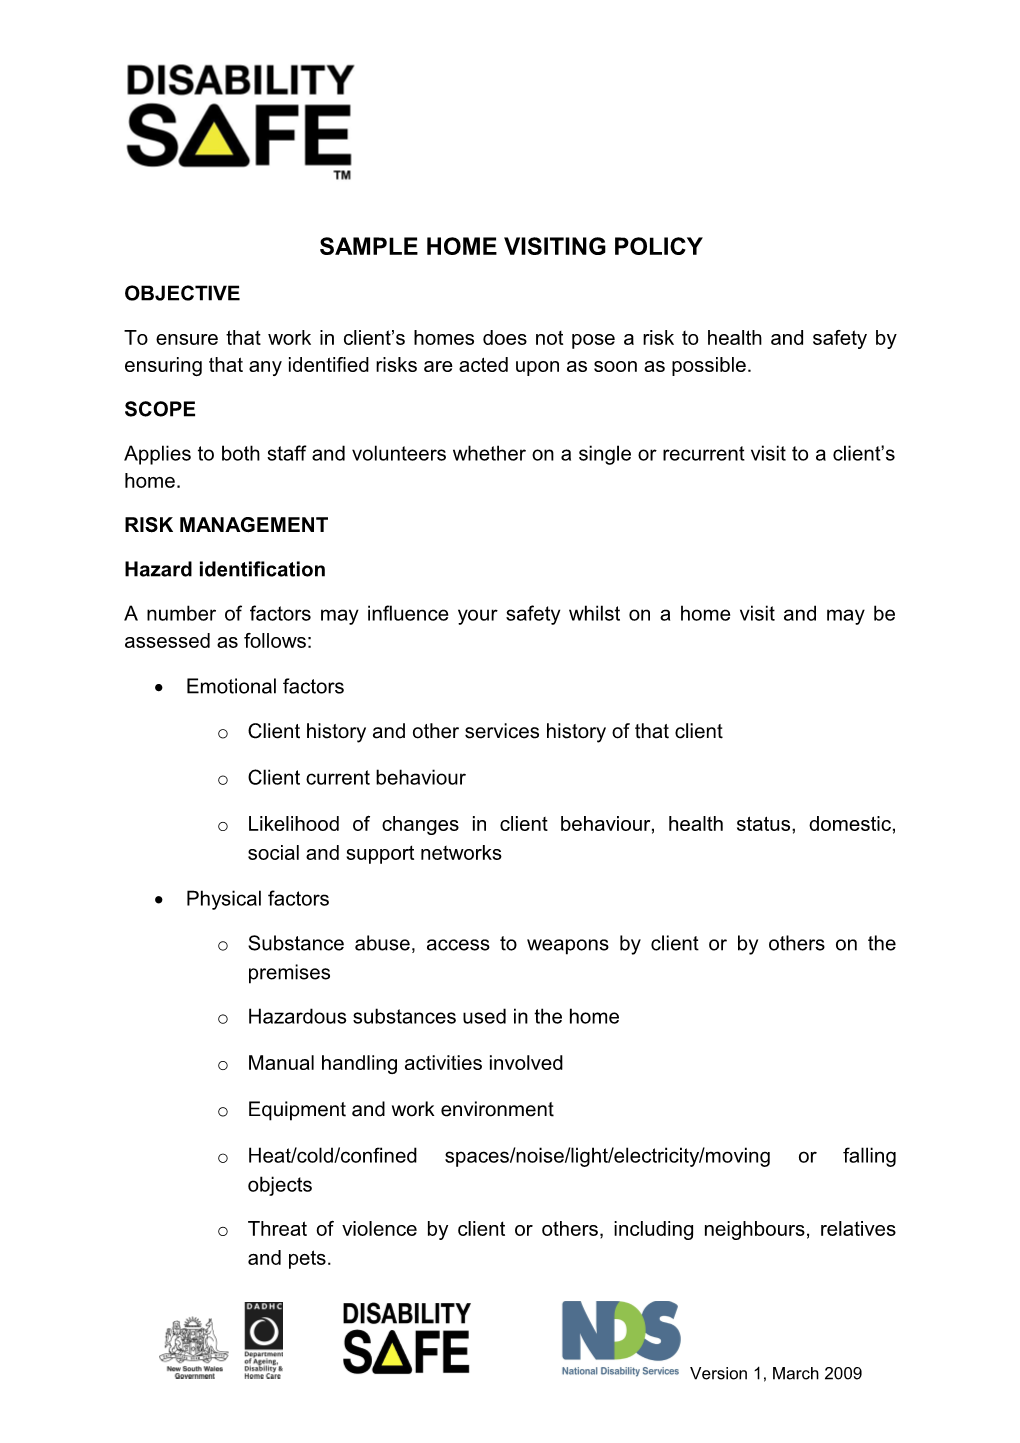 Sample Home Visiting Policy